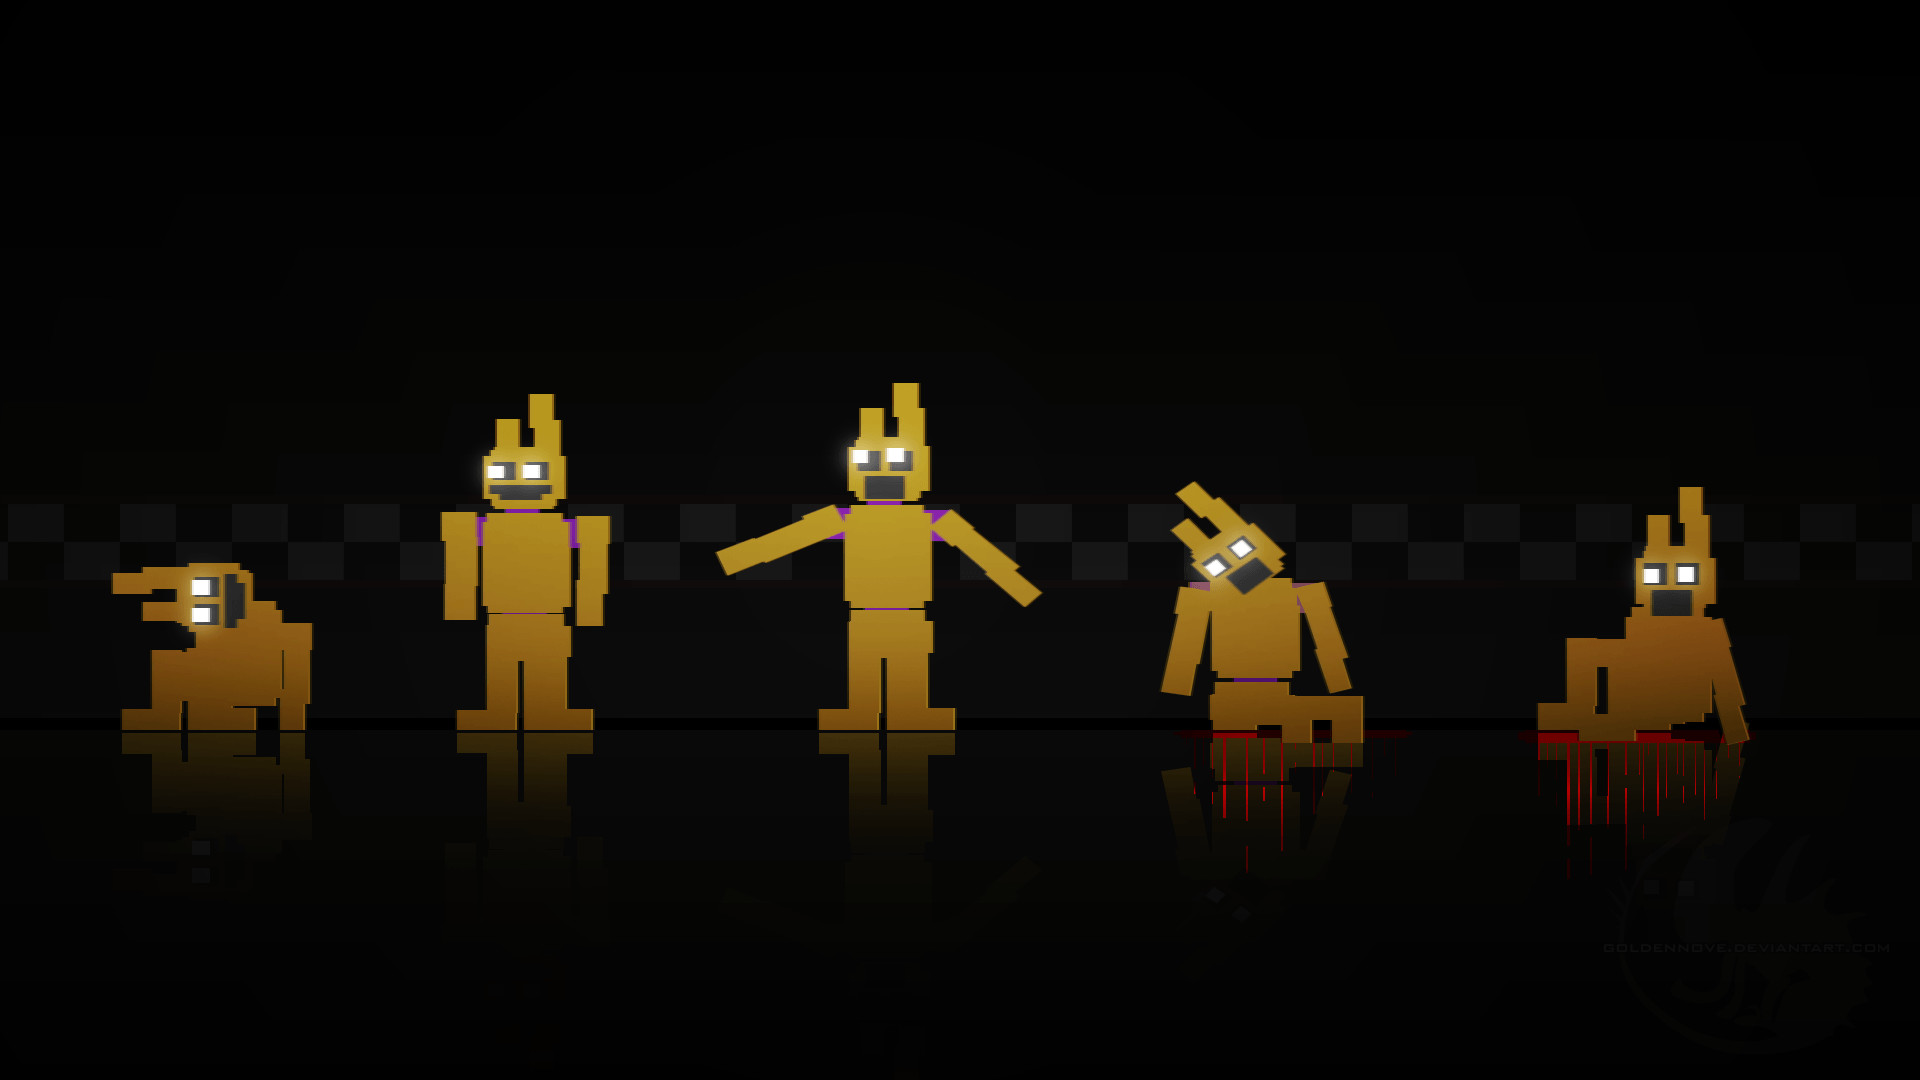 1920x1080 Five Nights at Freddy's 3 - wallpaper by GoldenNove on DeviantArt